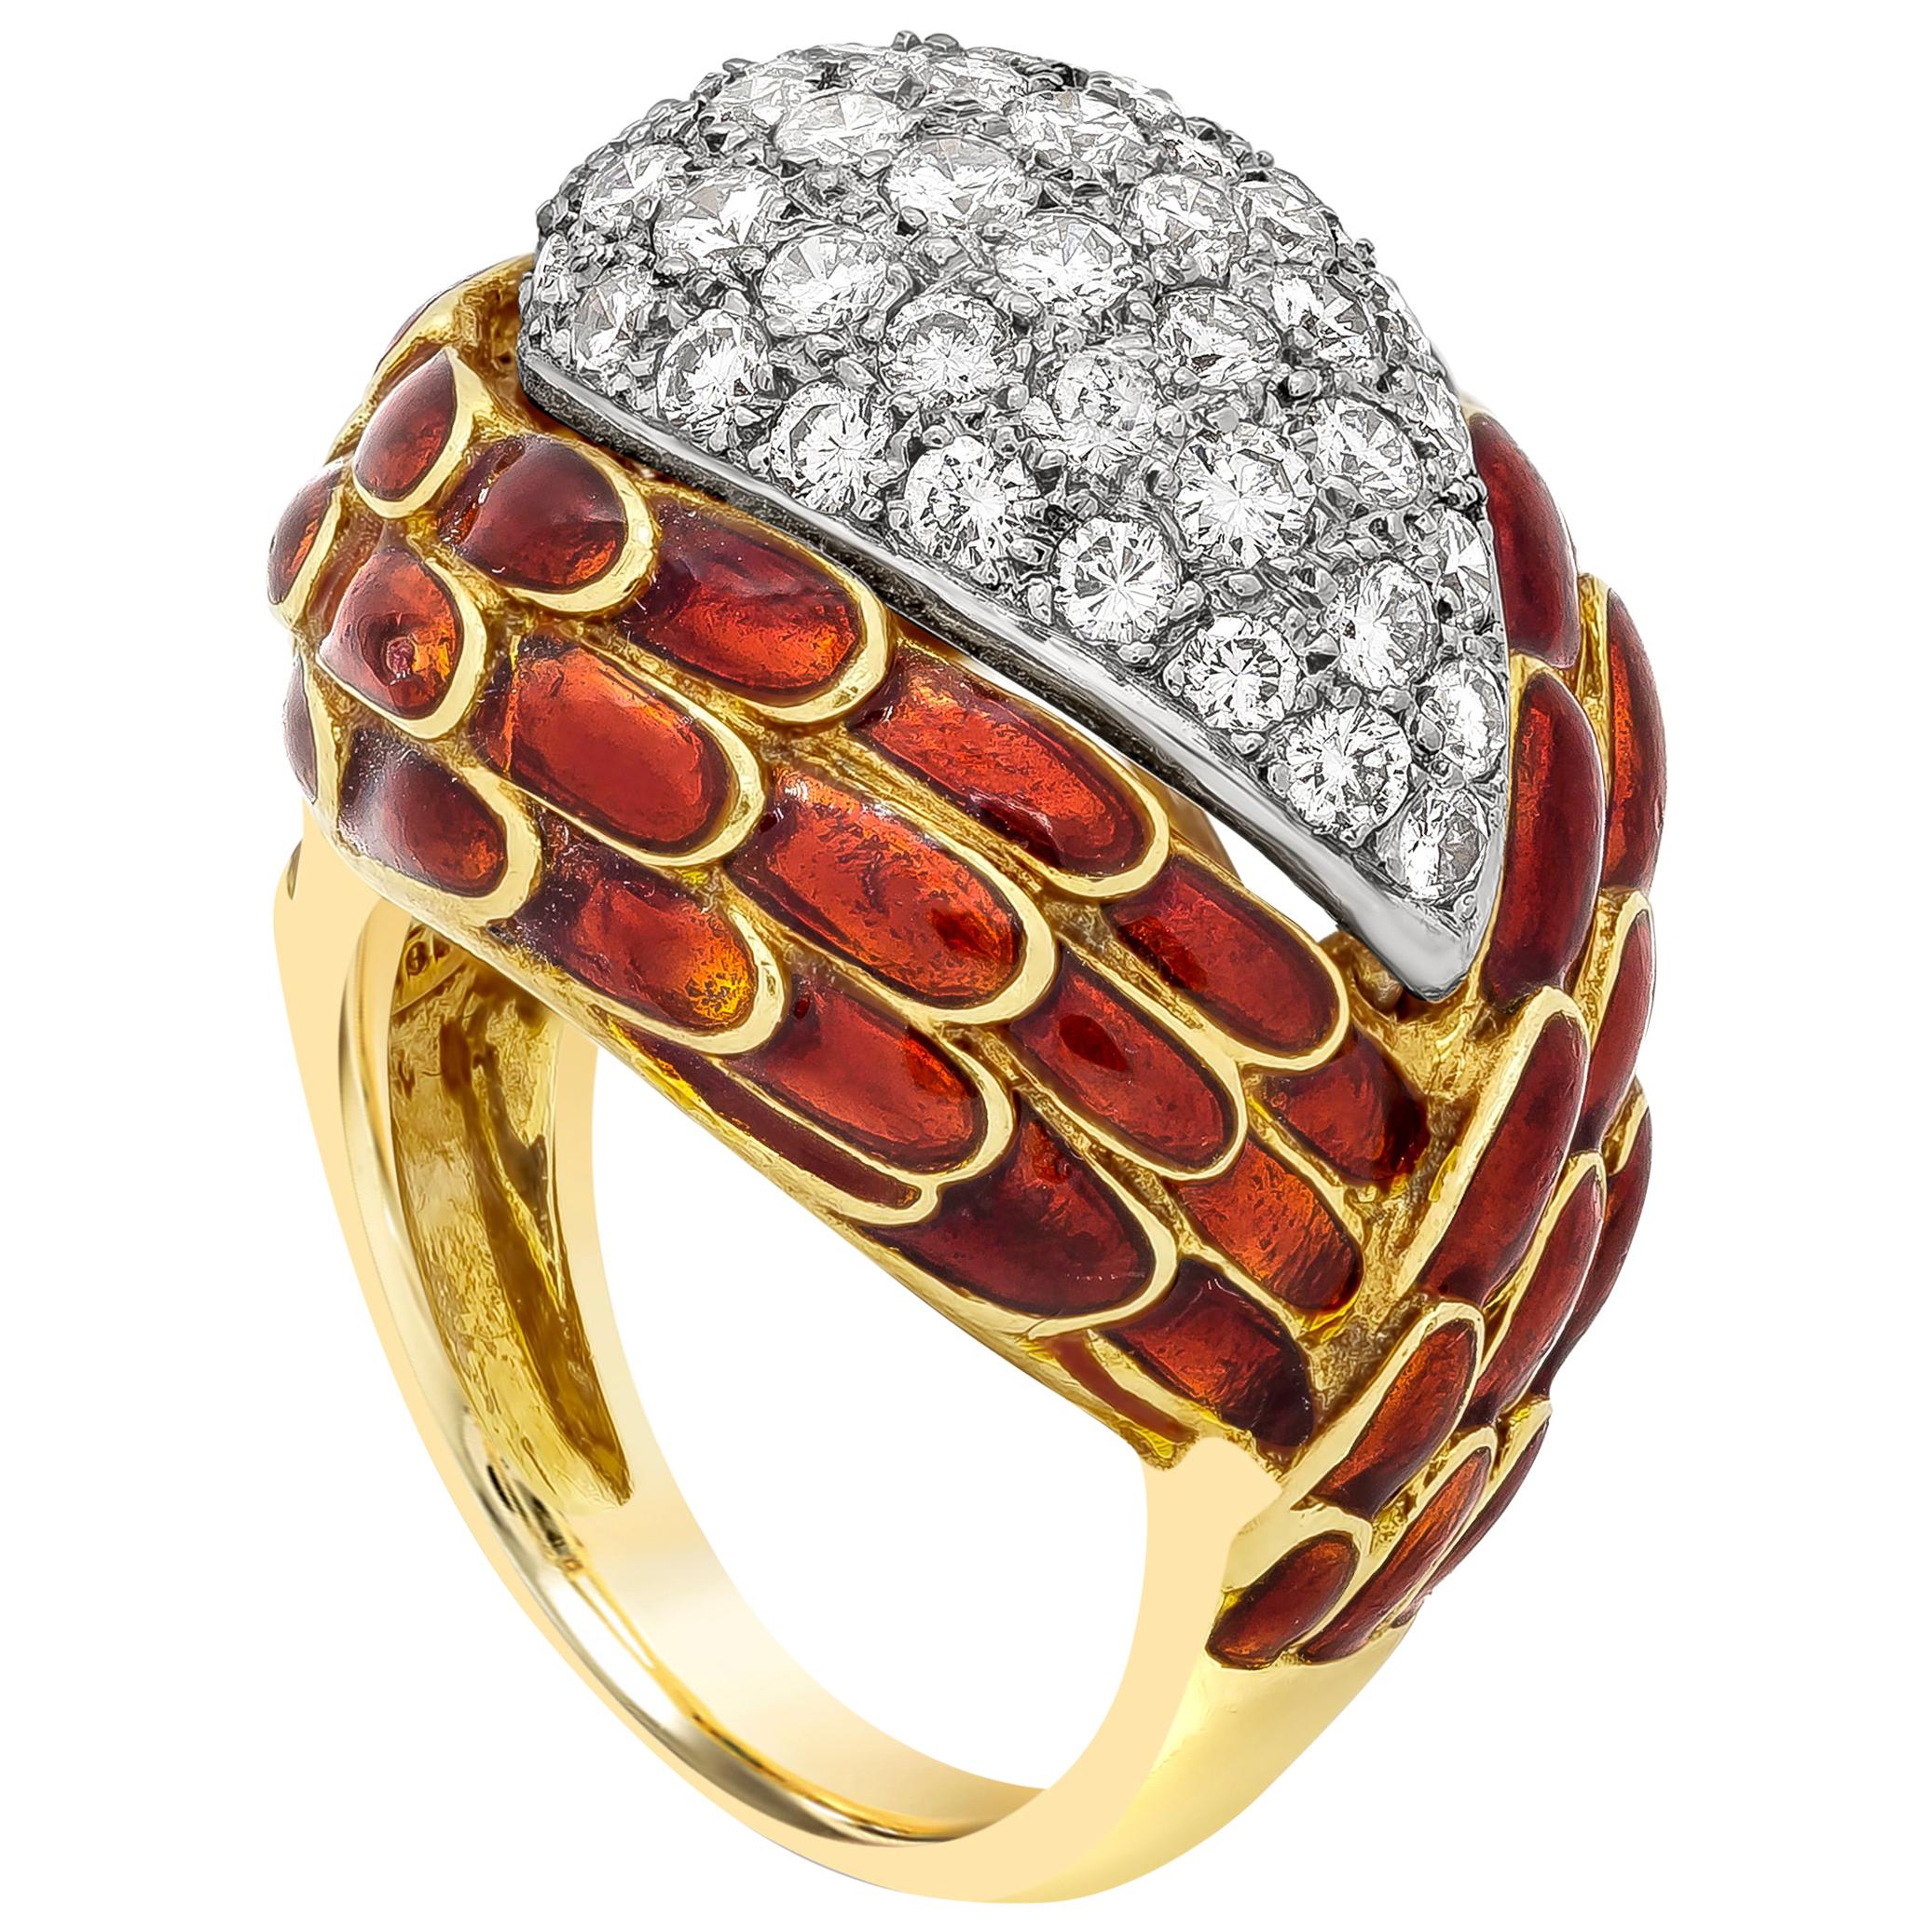 1.40 Carats Total Diamond Dome Cocktail Ring with Red Enamel 